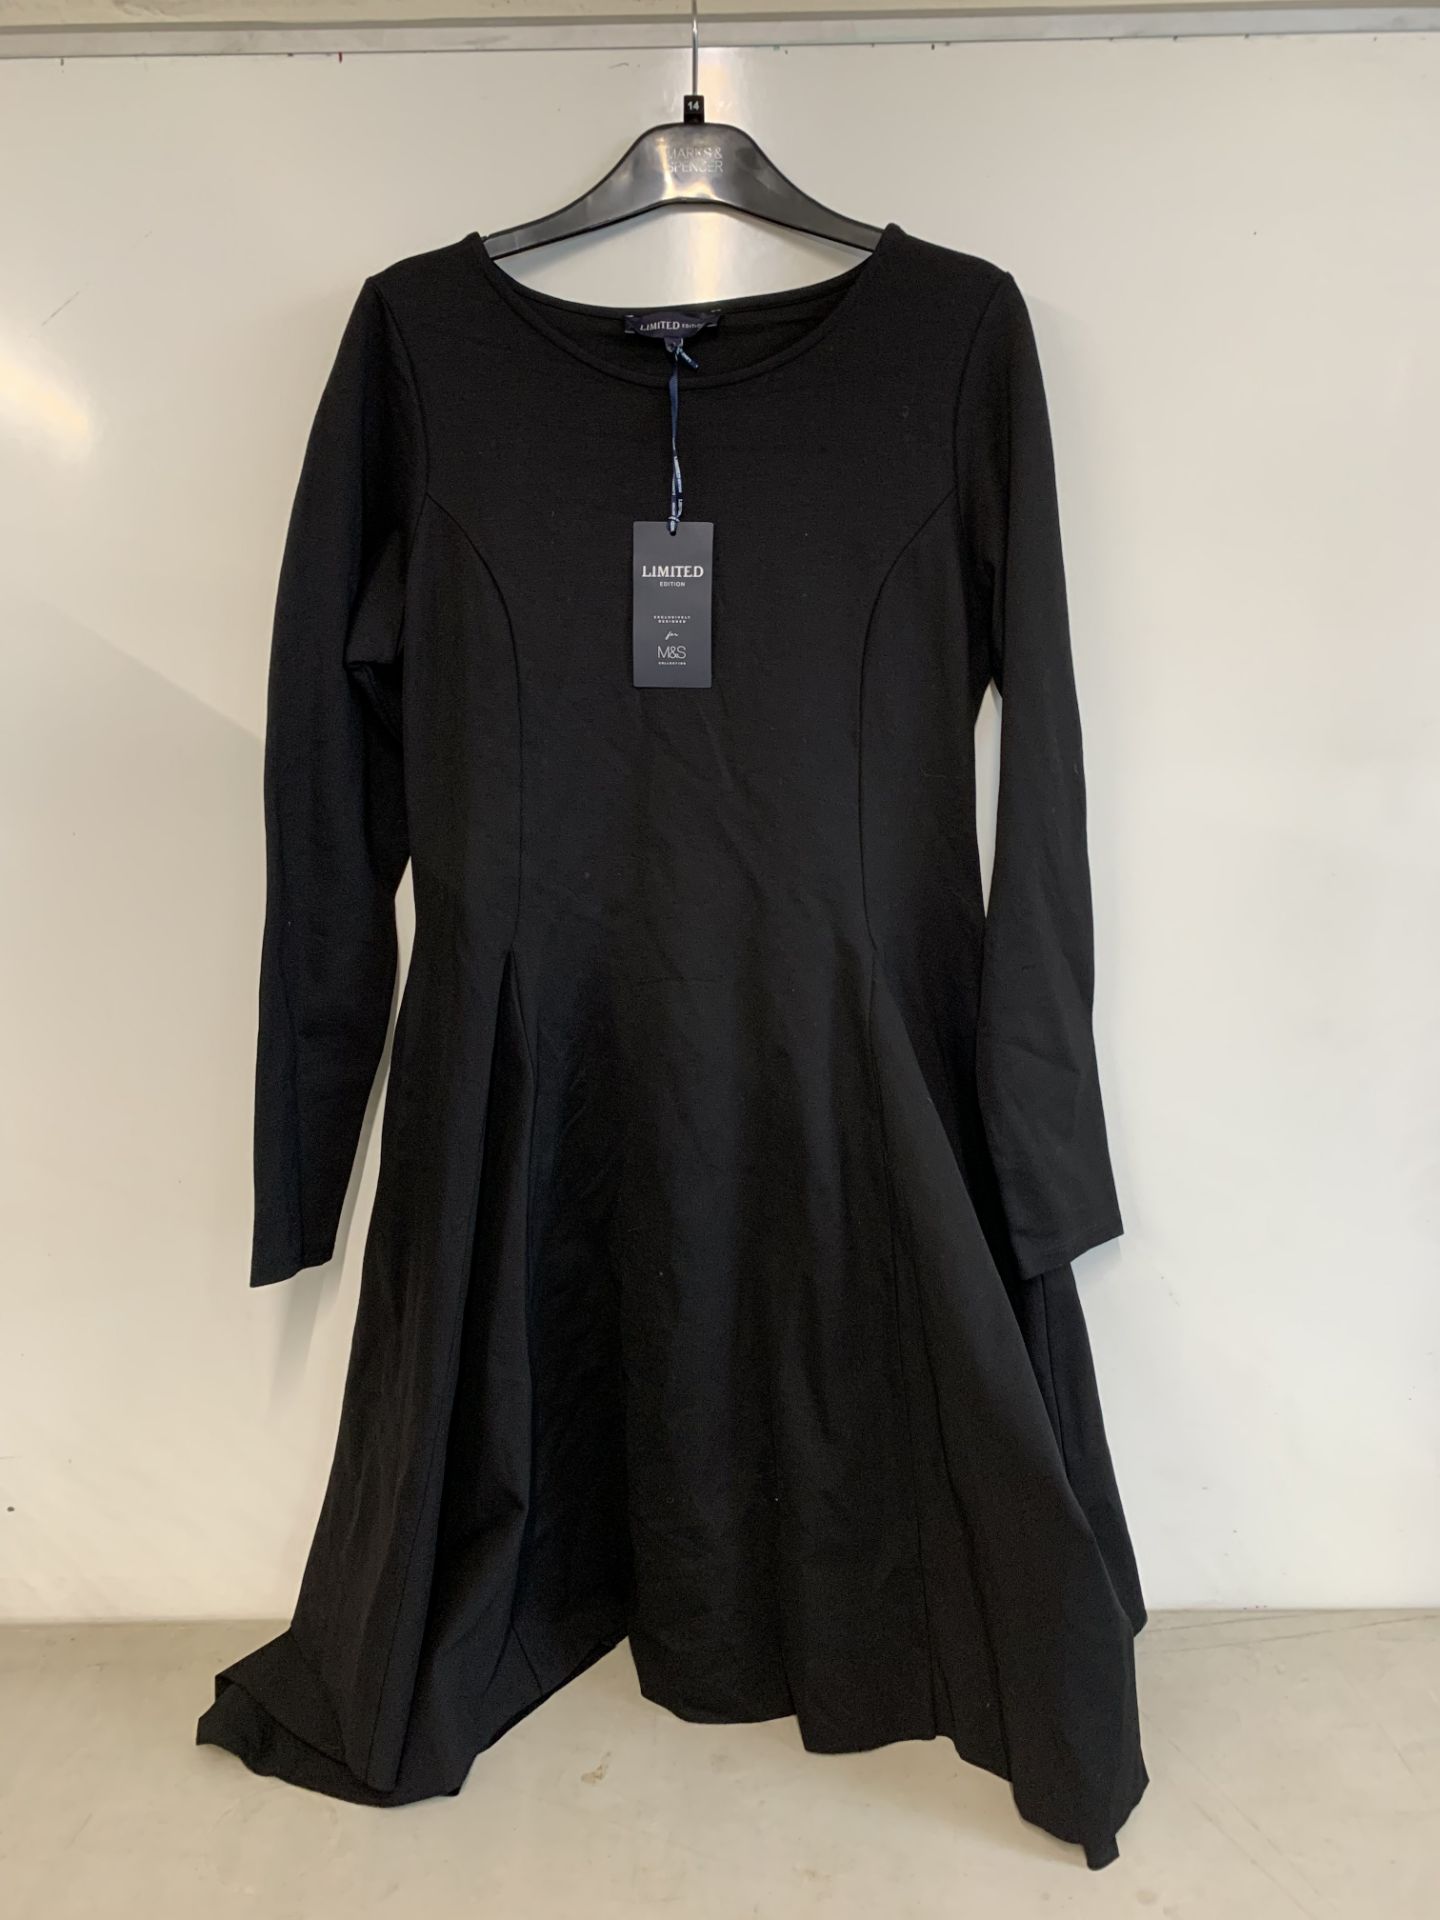 M&S limited edition women's long sleeved dress